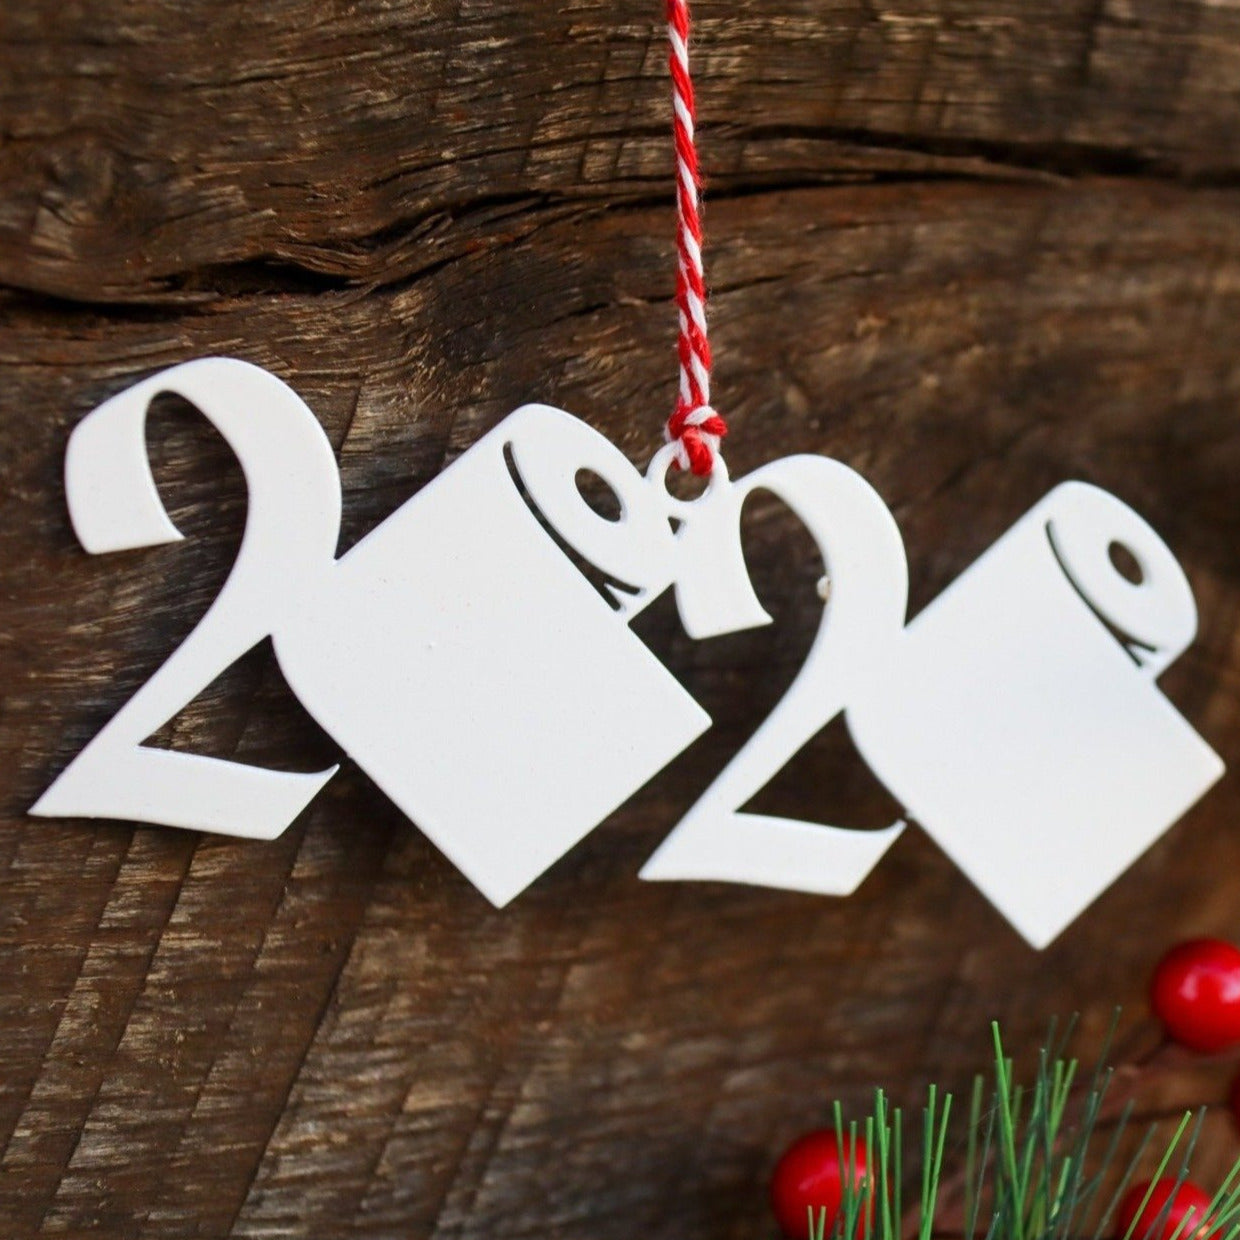 2020 Toilet Paper Christmas Ornament - Funny Holiday Stocking Stuffer Gift - Tree Home Decor